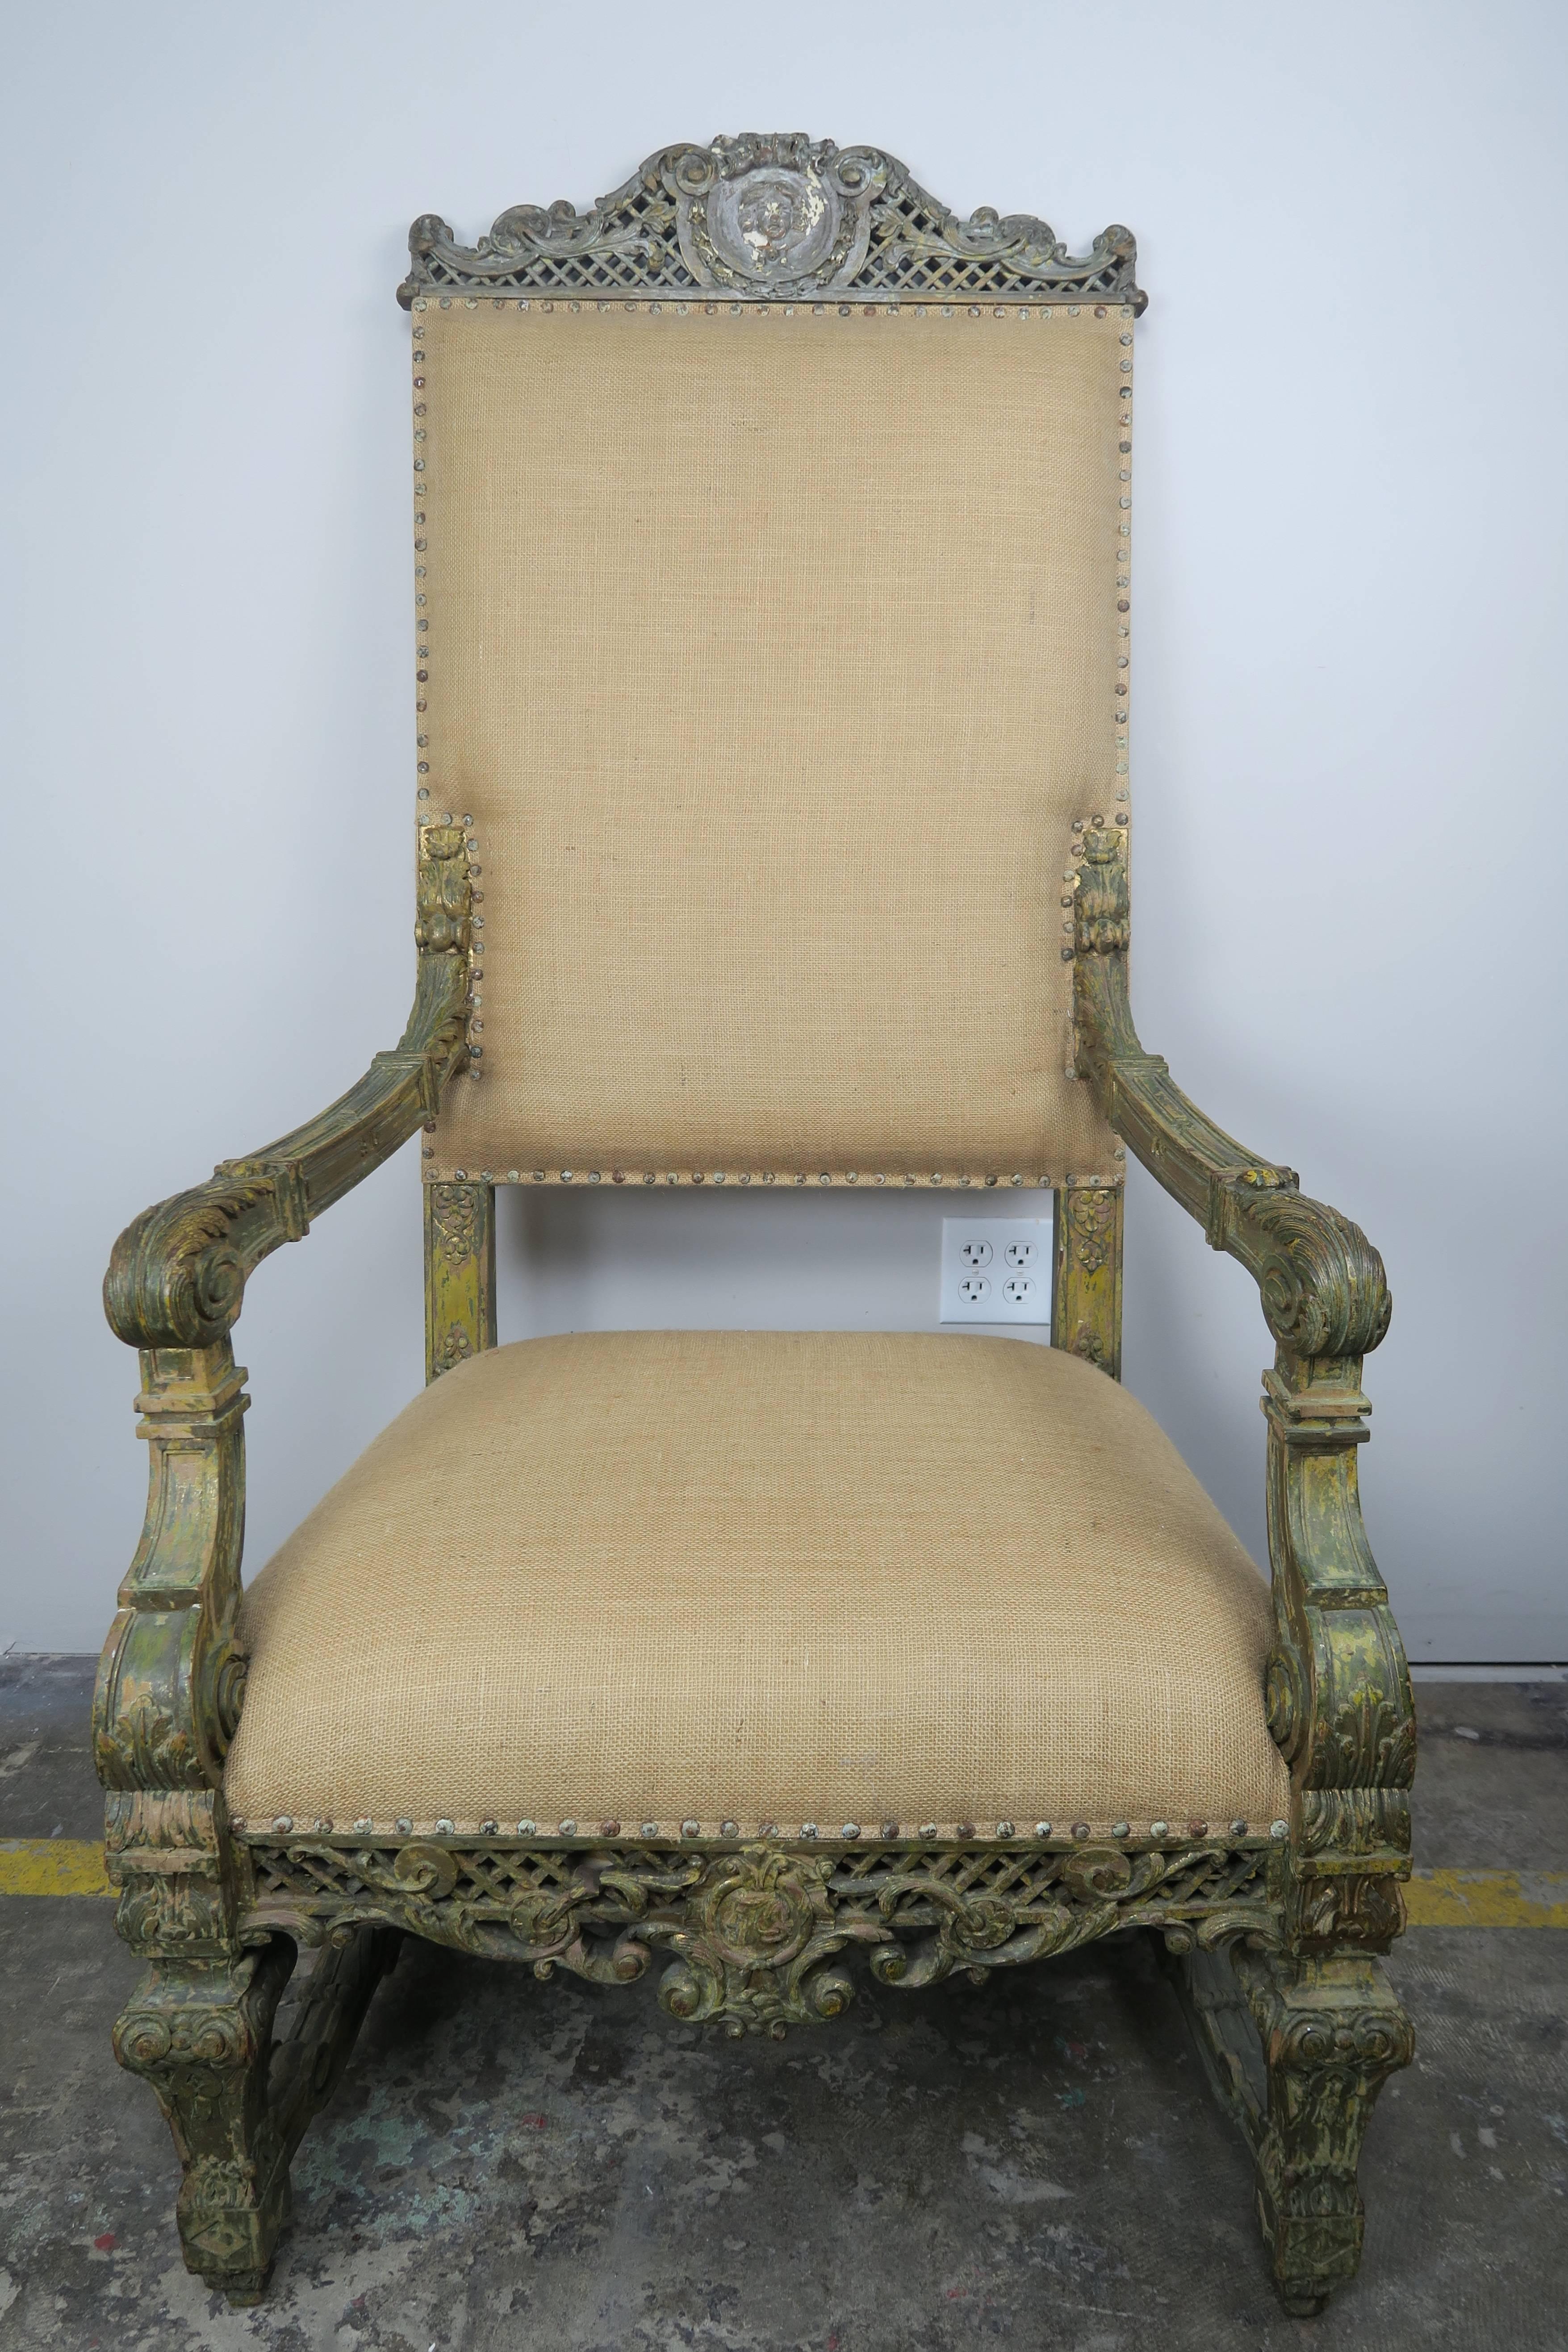 19th century monumental scaled Italian carved wood painted armchair standing on four straight legs. Ornate carving throughout the armchair. Newly upholstered in a natural burlap textile with original nailhead trim detail.